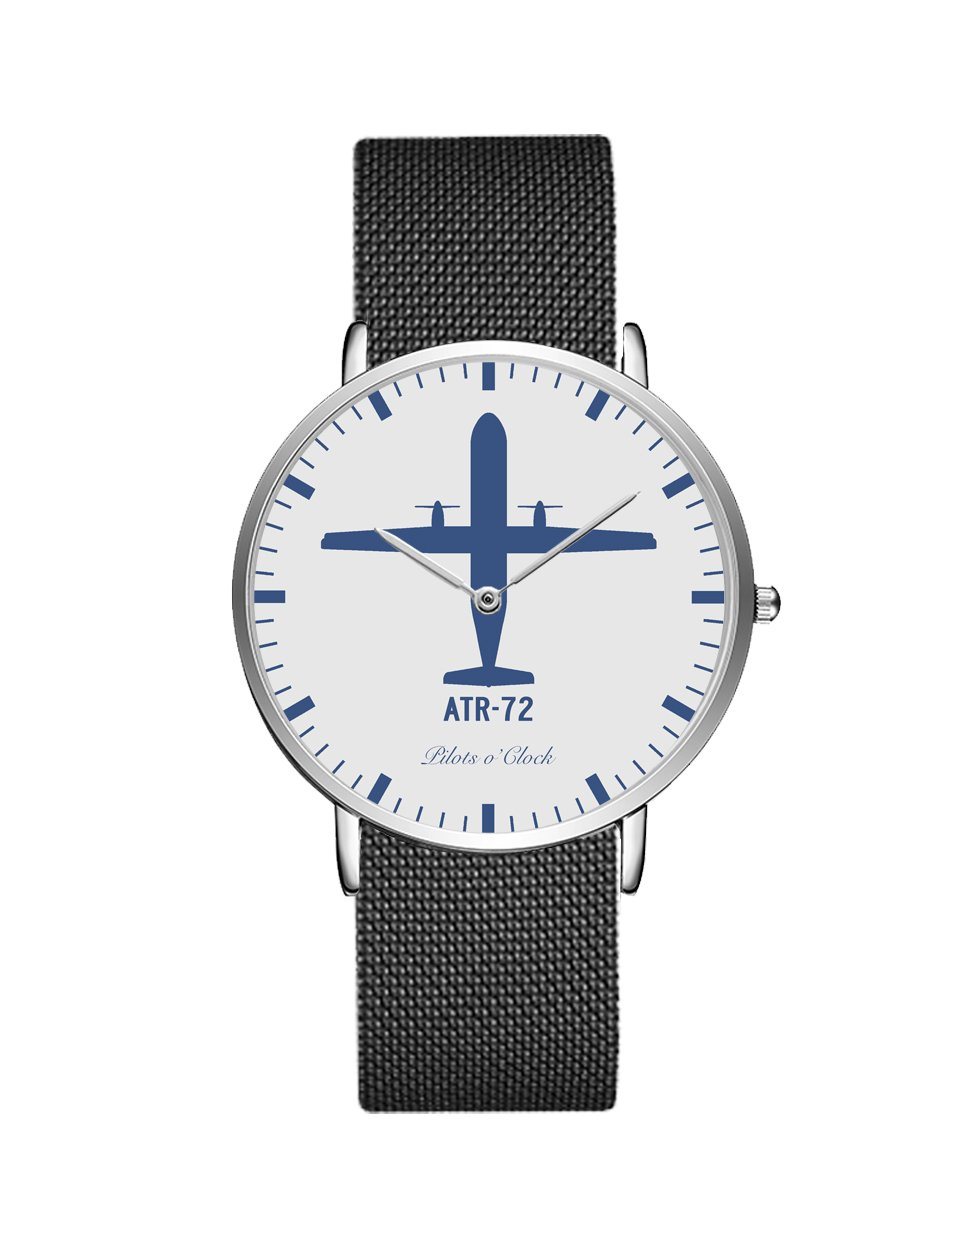 ATR-72 Stainless Steel Strap Watches Pilot Eyes Store Silver & Black Stainless Steel Strap 